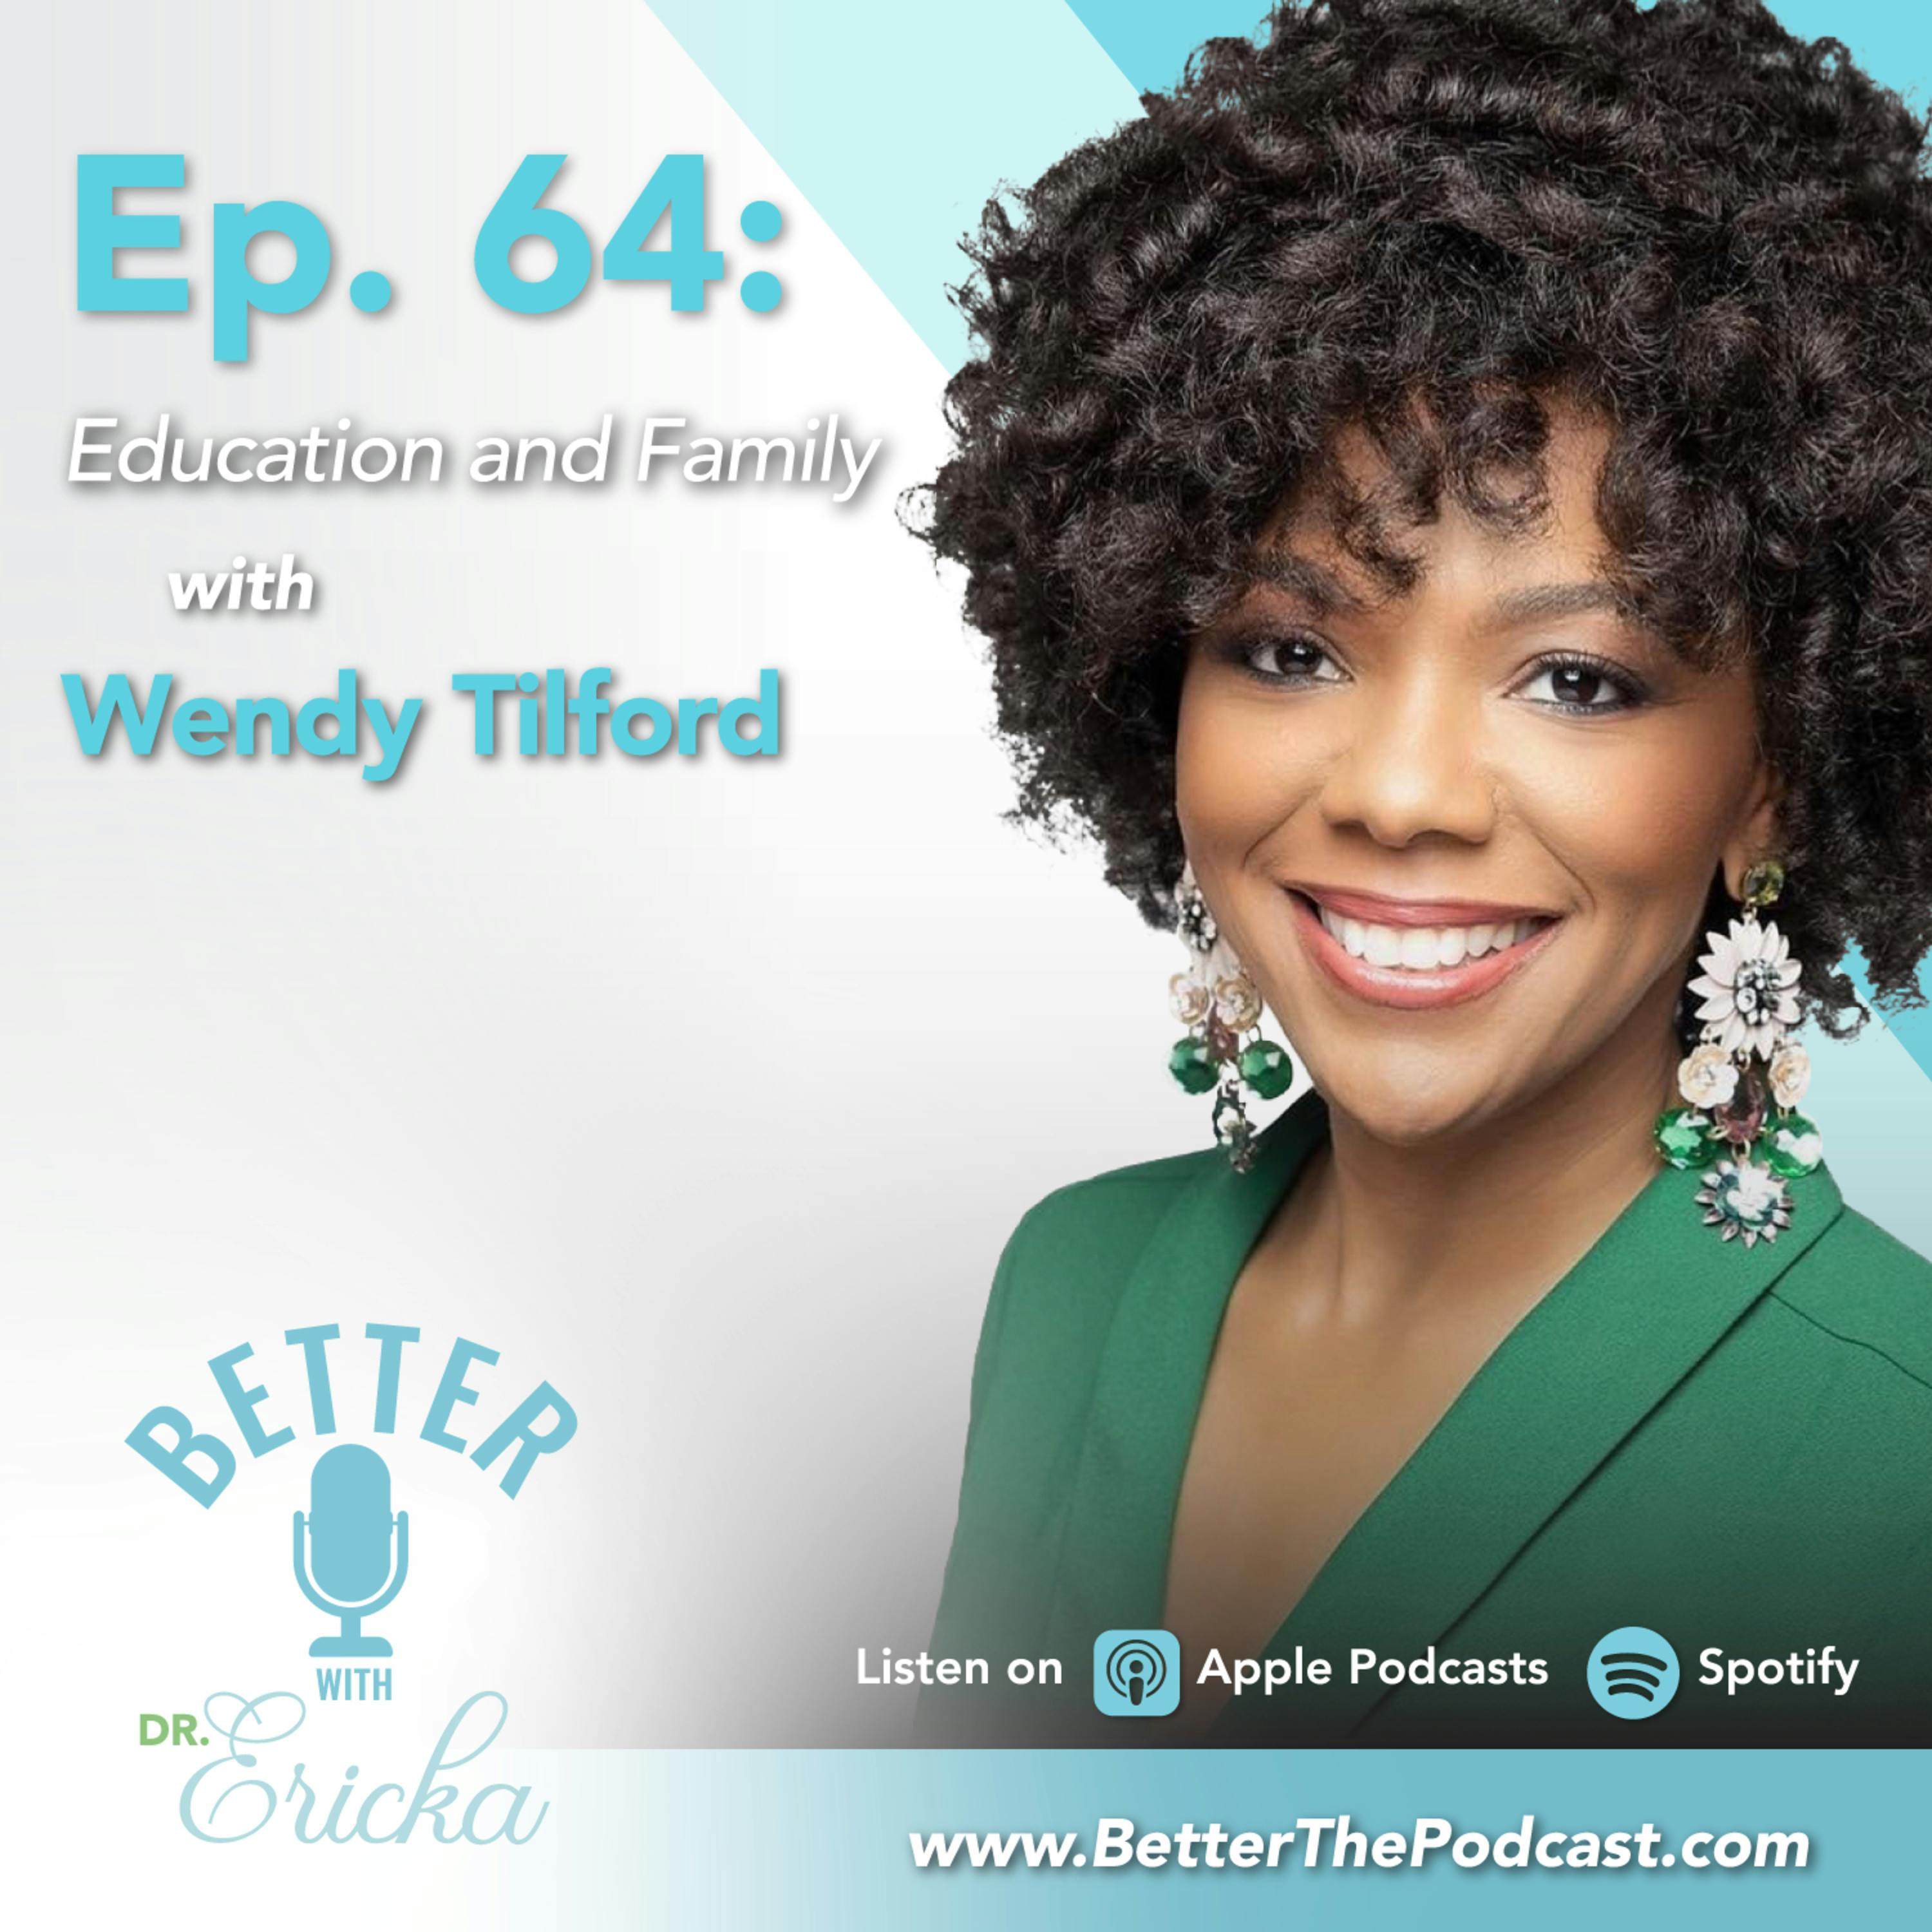 Family and Education with Wendy Tilford